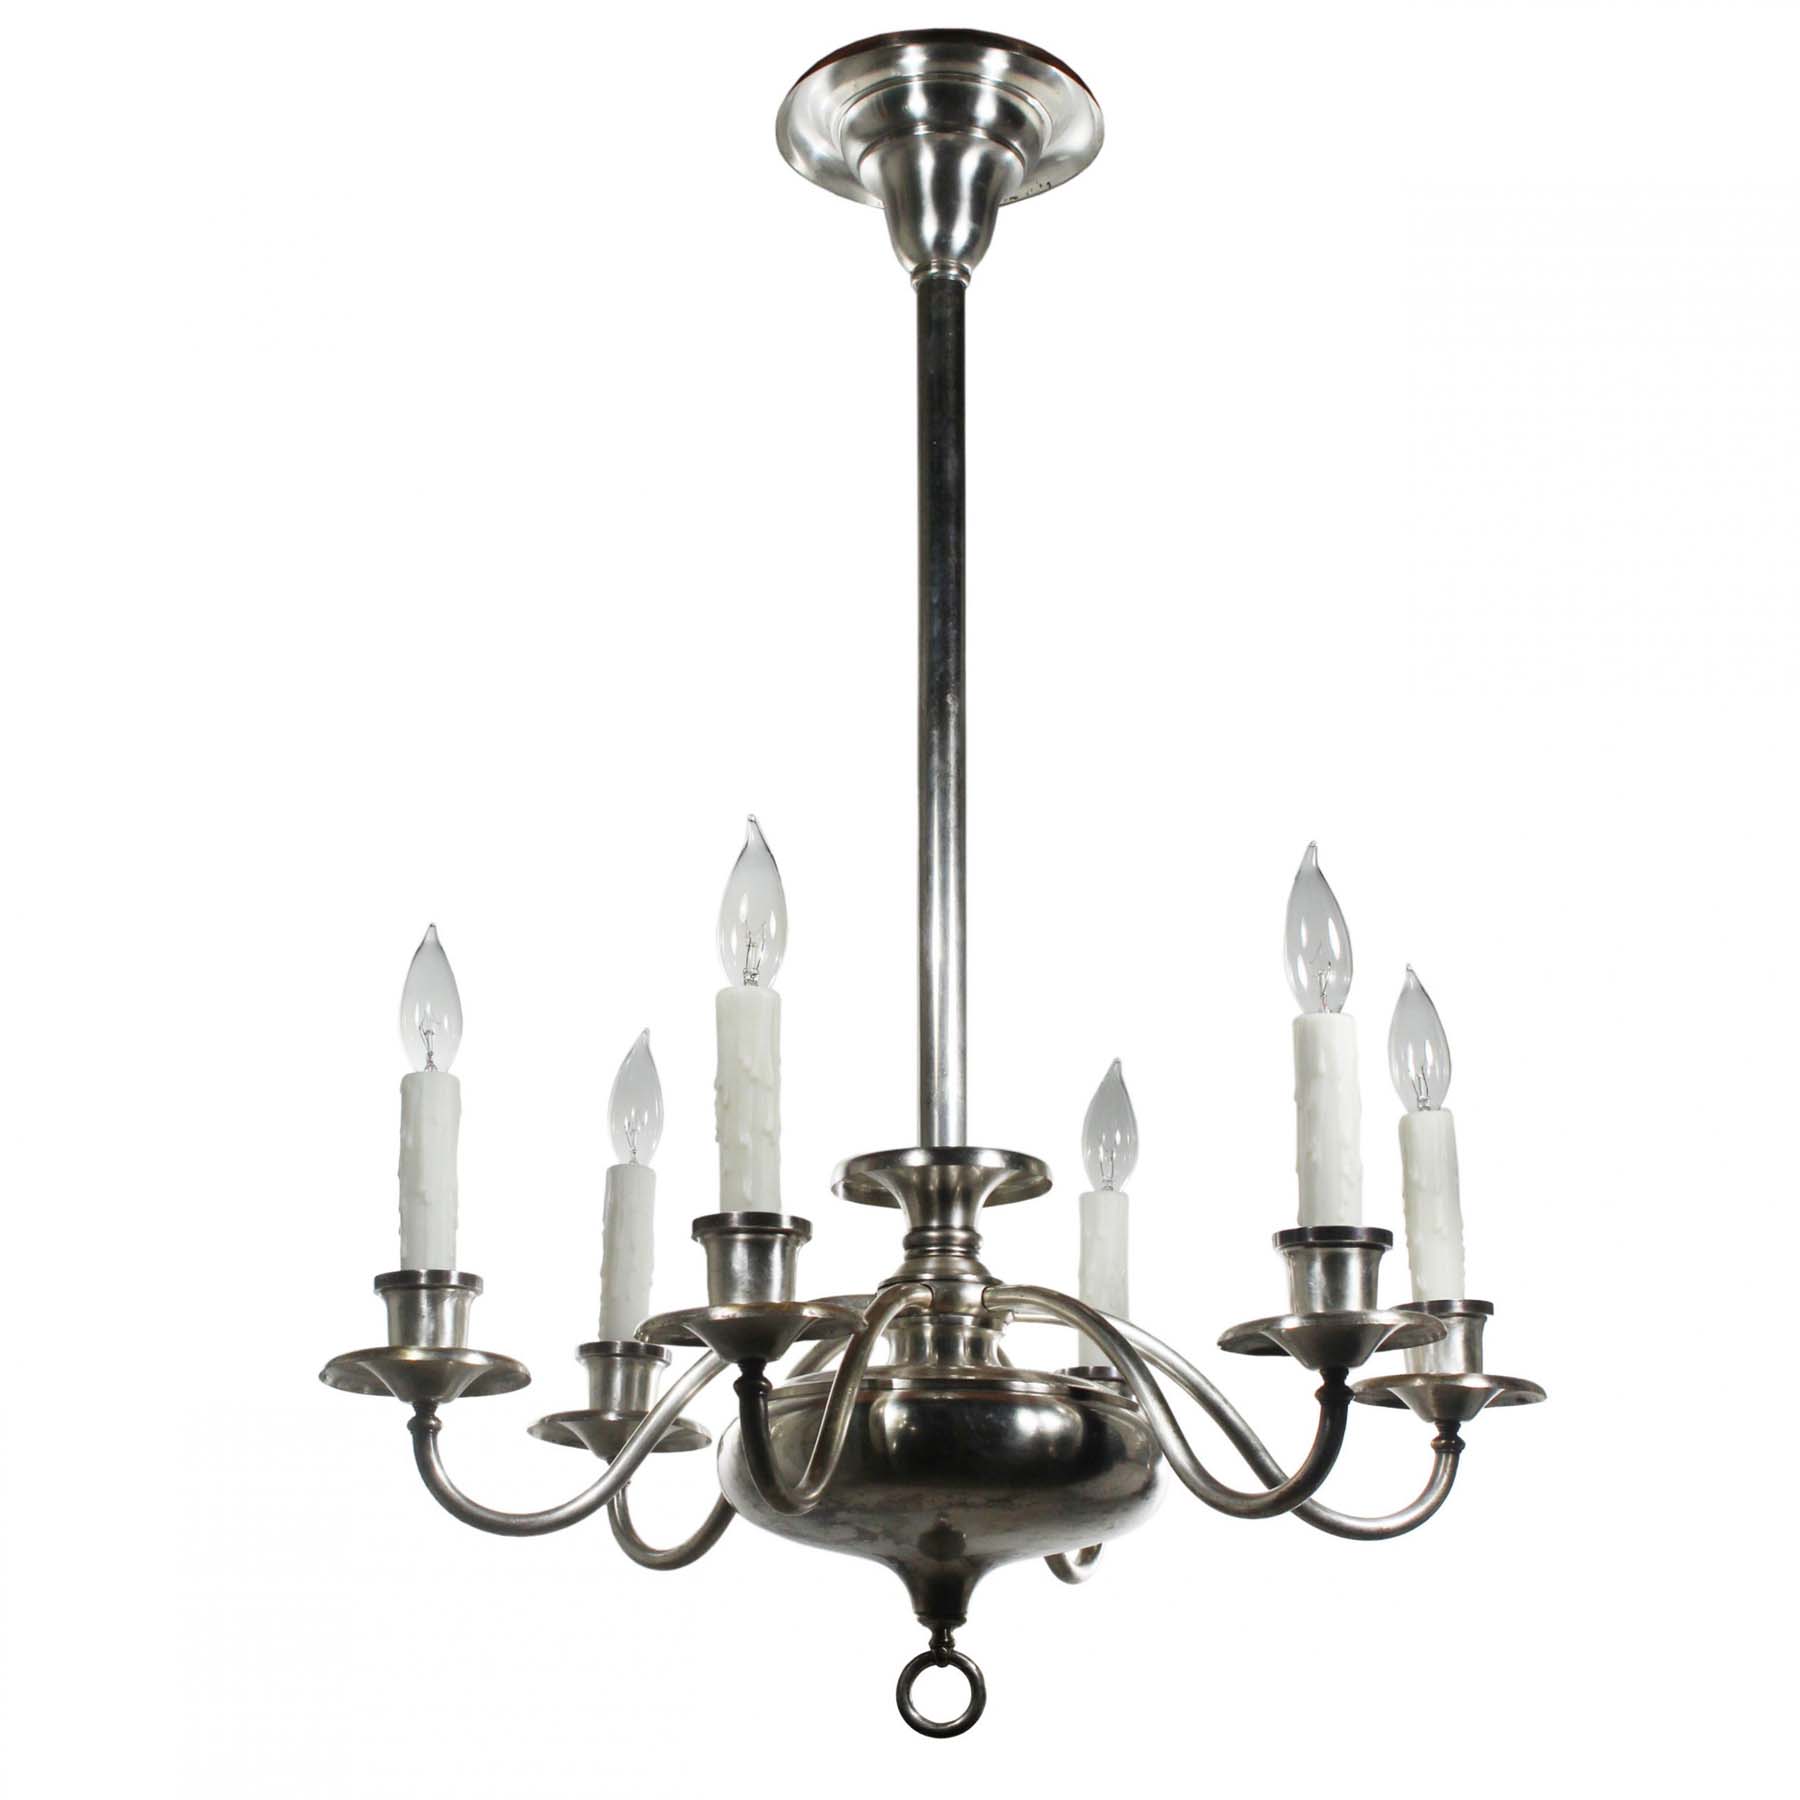 Colonial Revival Silver Plated Chandelier, Antique Lighting-0